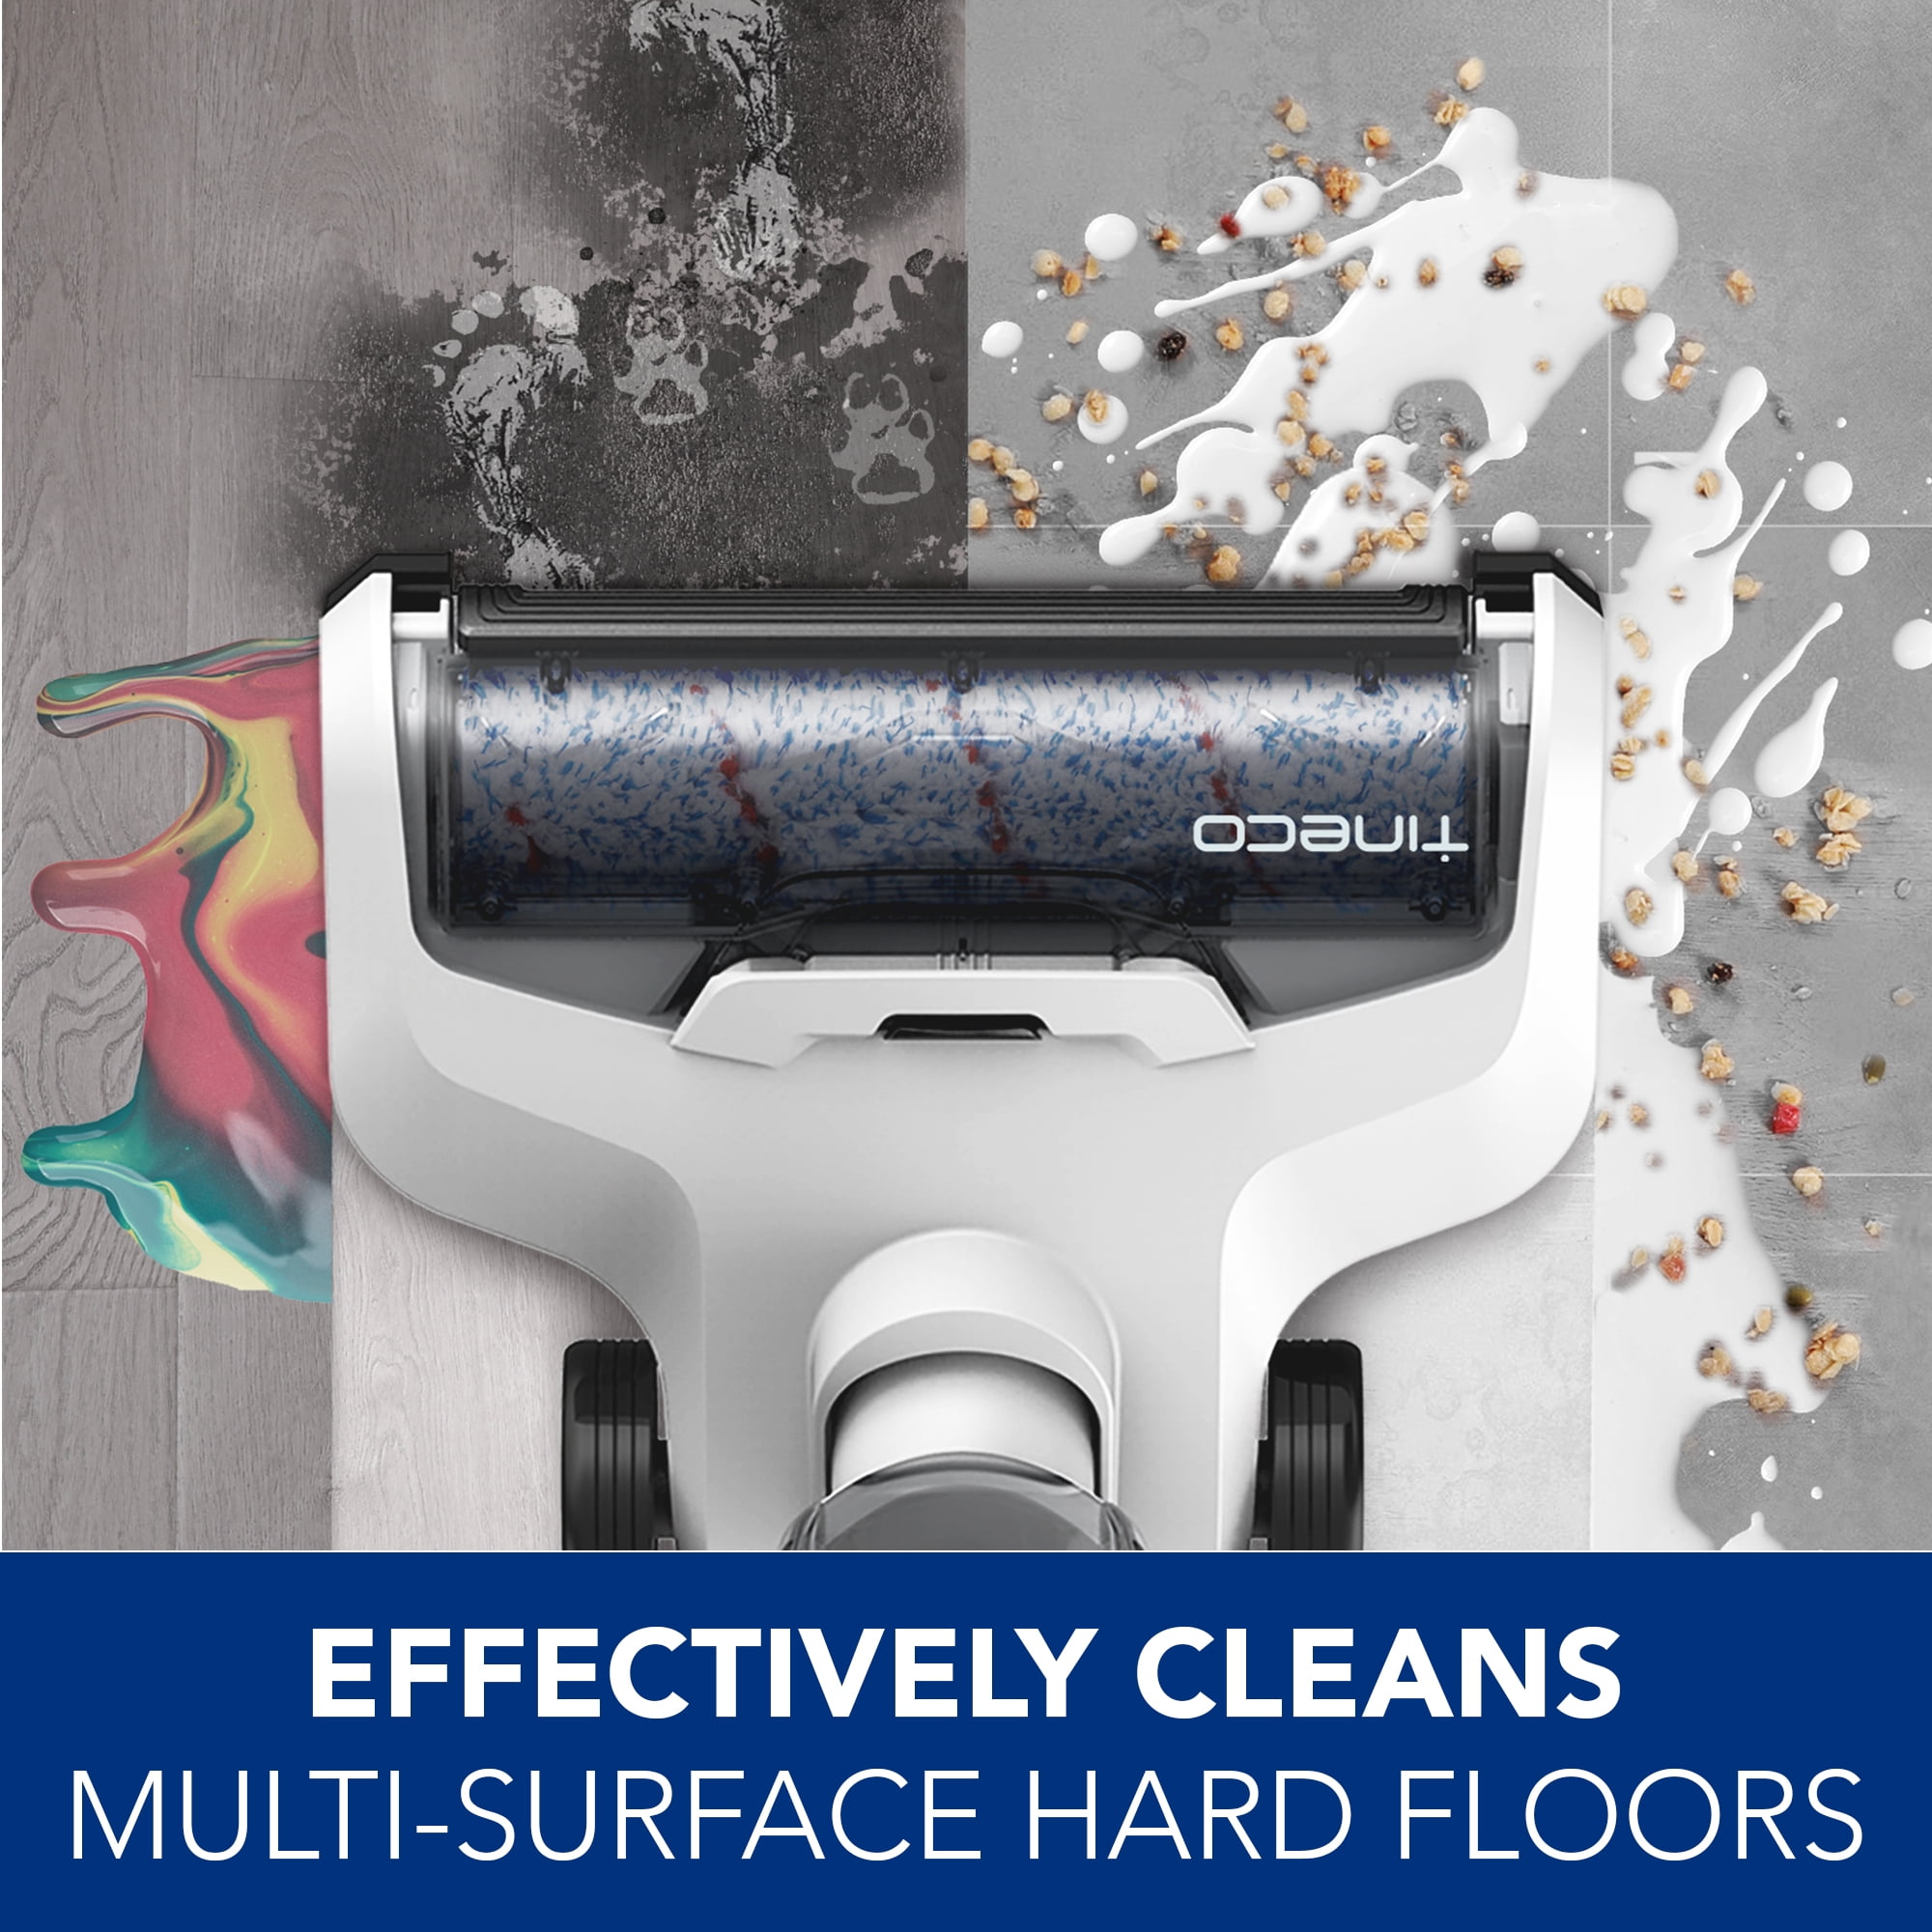 php8legs on X: Tineco iFloor Multi Surface Cleaning Solution oz